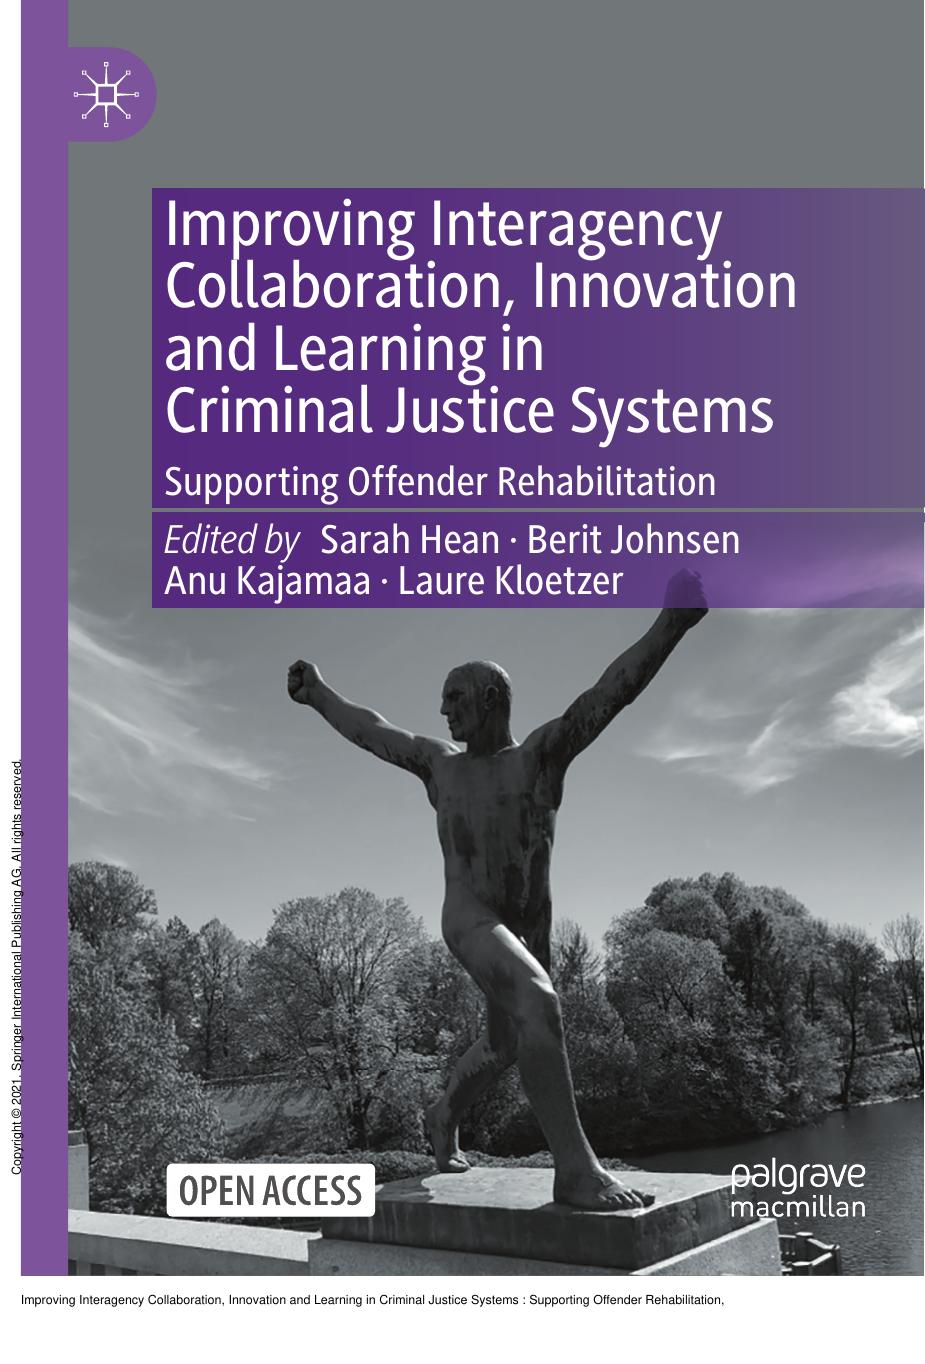 Improving Interagency Collaboration, Innovation and Learning in Criminal Justice Systems : Supporting Offender Rehabilitation by Sarah Hean; Berit Johnsen; Anu Kajamaa; Laure Kloetzer